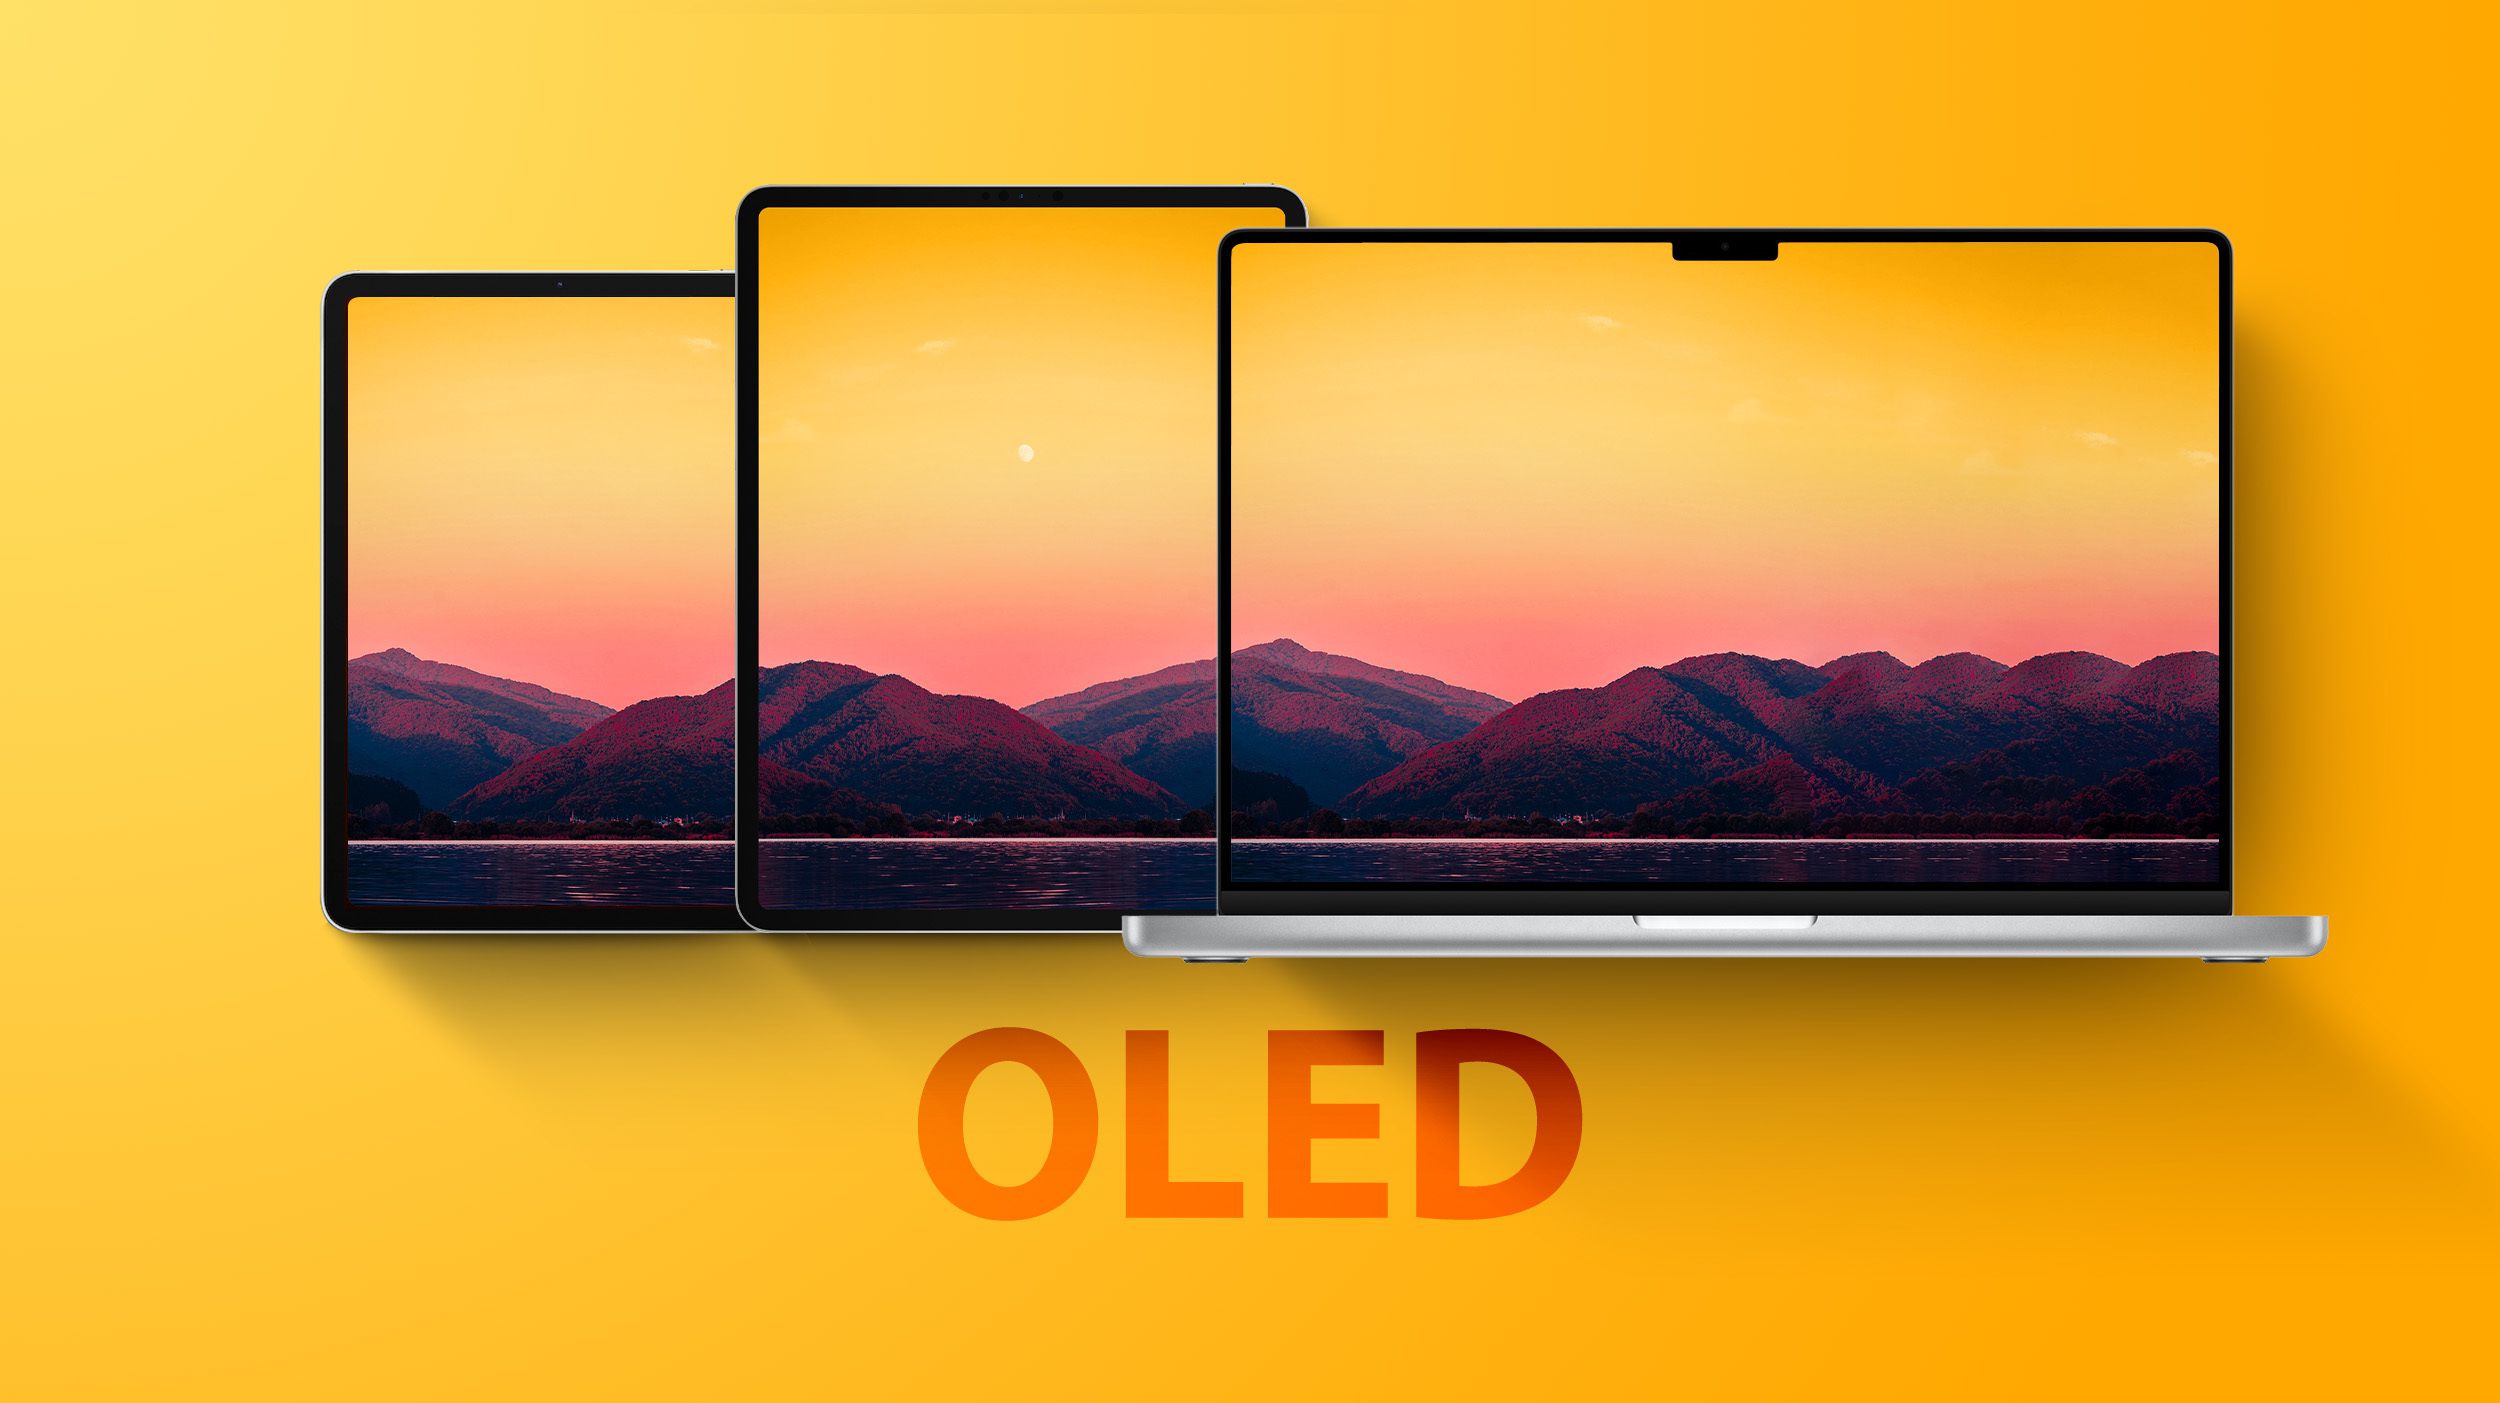 Future iPad Pro and MacBook Pro Models Rumored to Feature Ultra-Bright Double-Stack OLED Displays